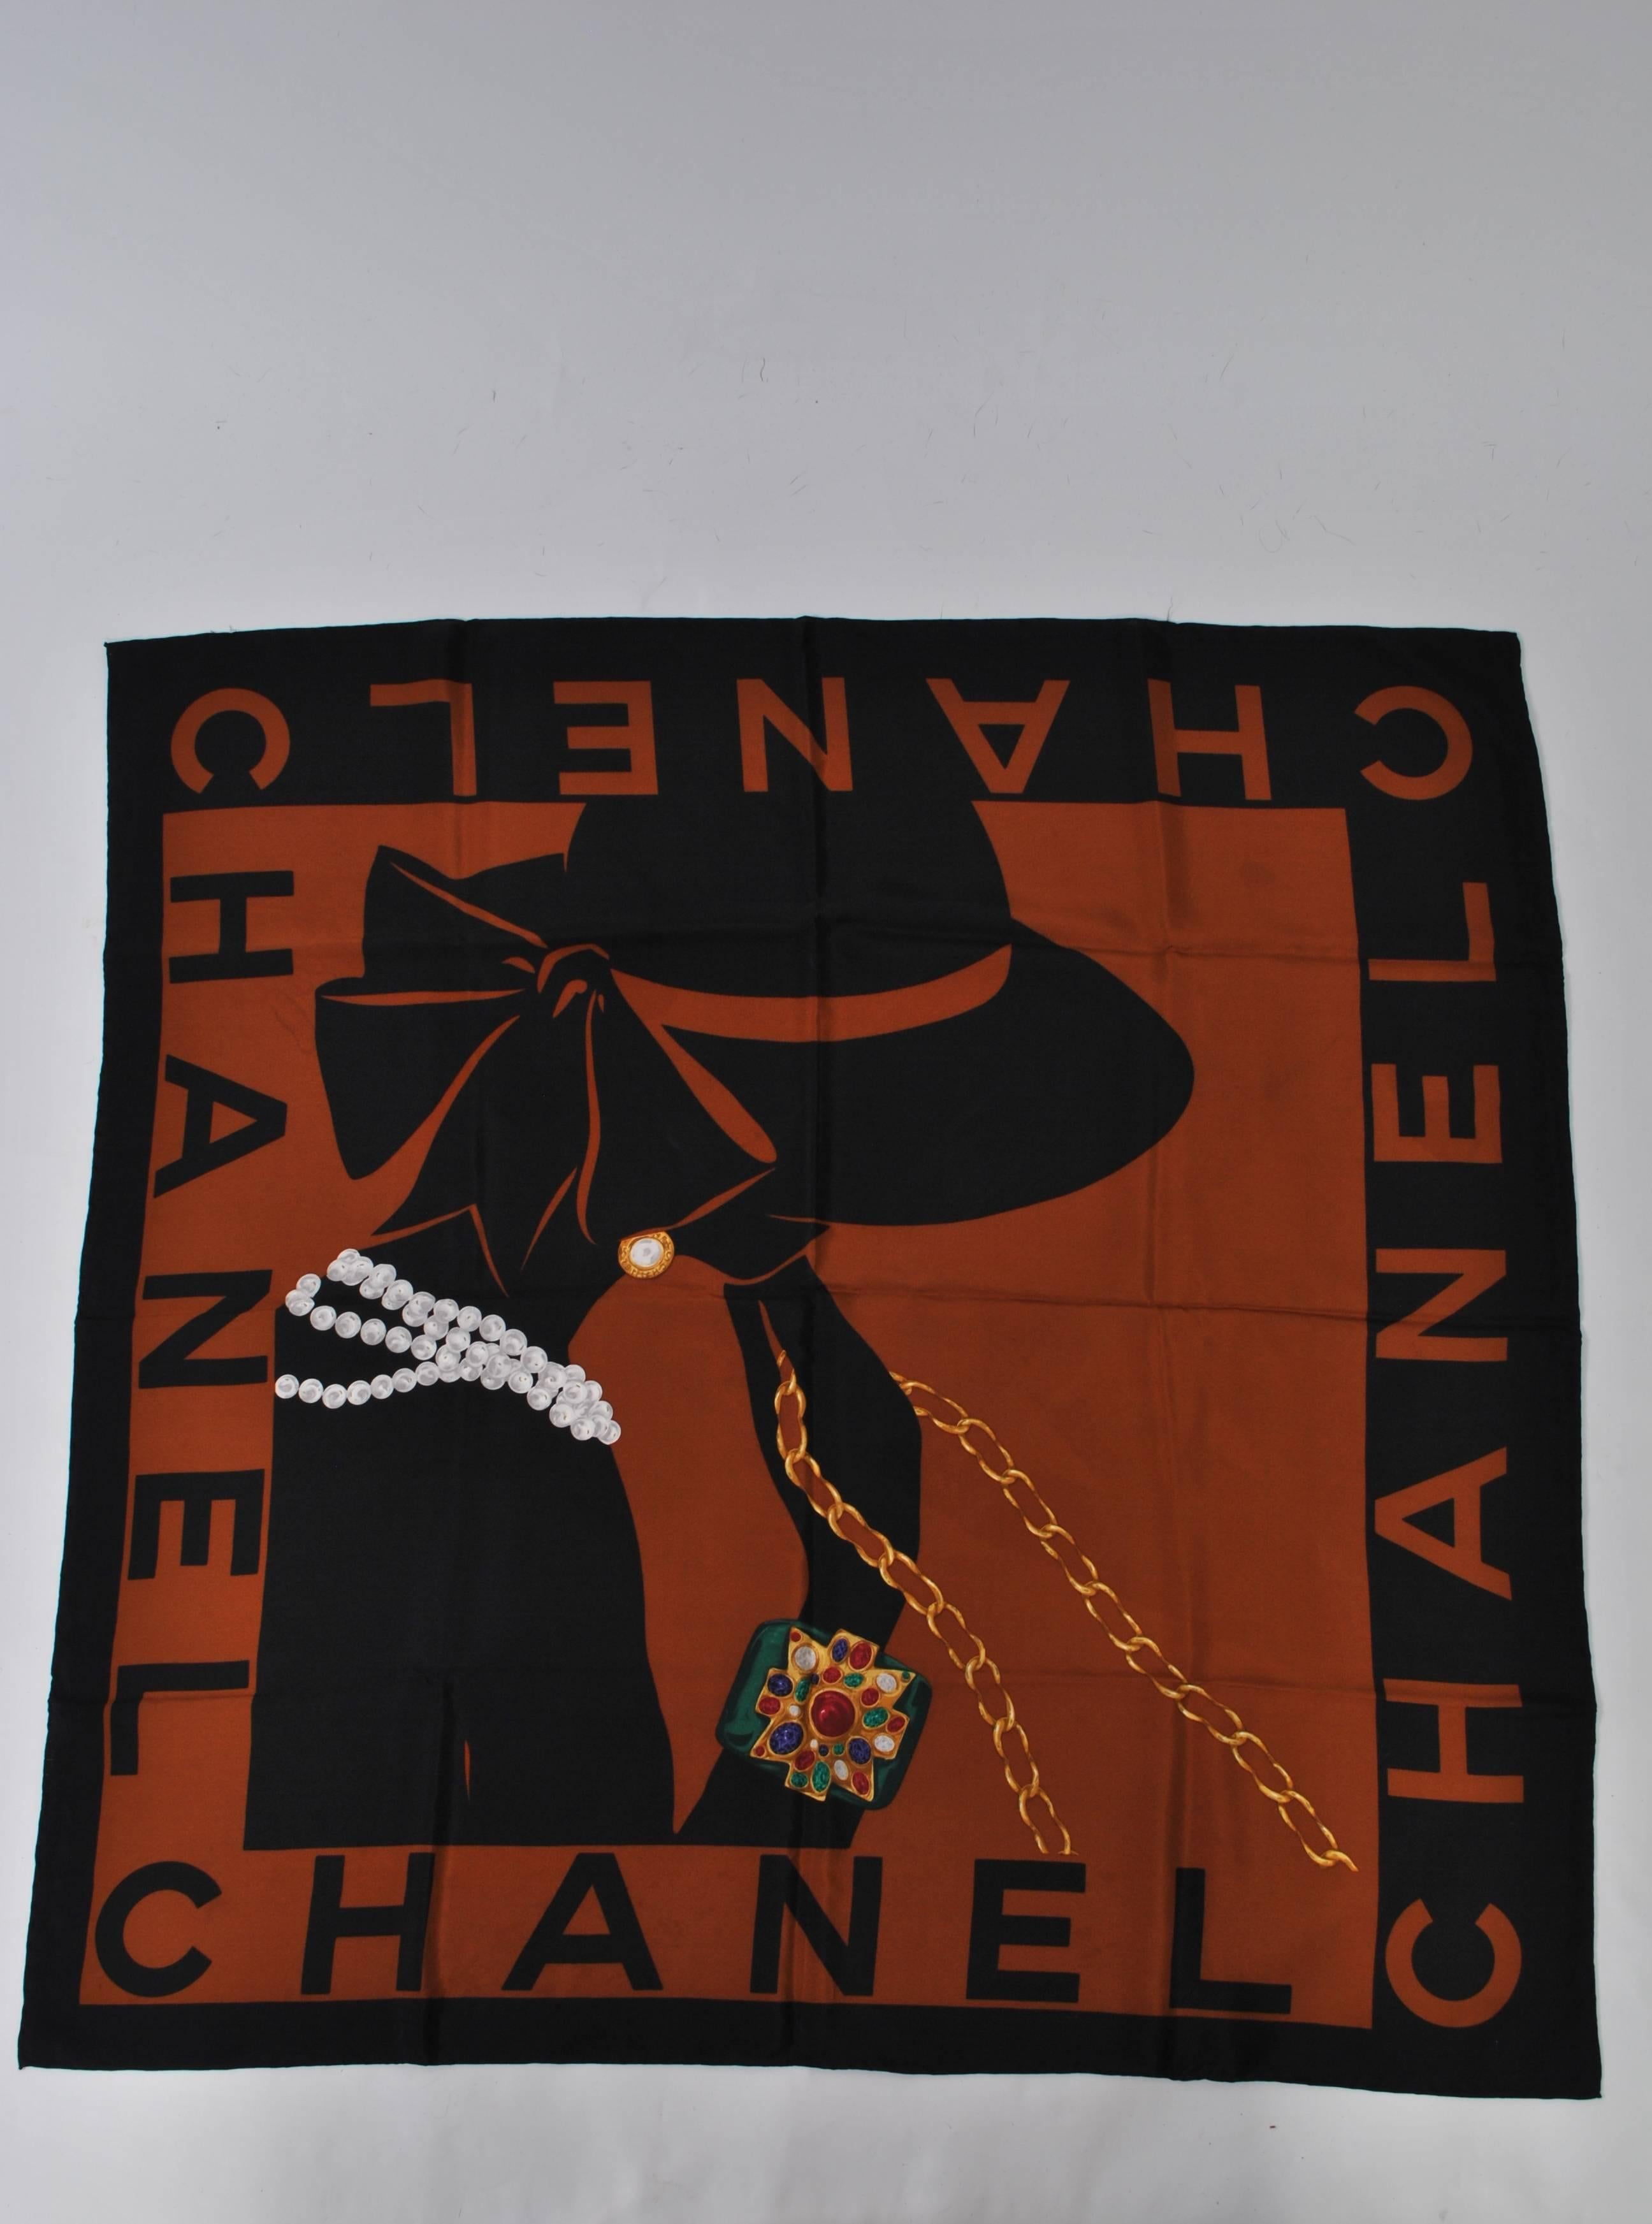 Chanel silk scarf in cocoa and black featuring profile female bust with large hat and classic Chanel motifs - white pearls, leather and metal chain, and multi-stone cross bangle. Looks unused.